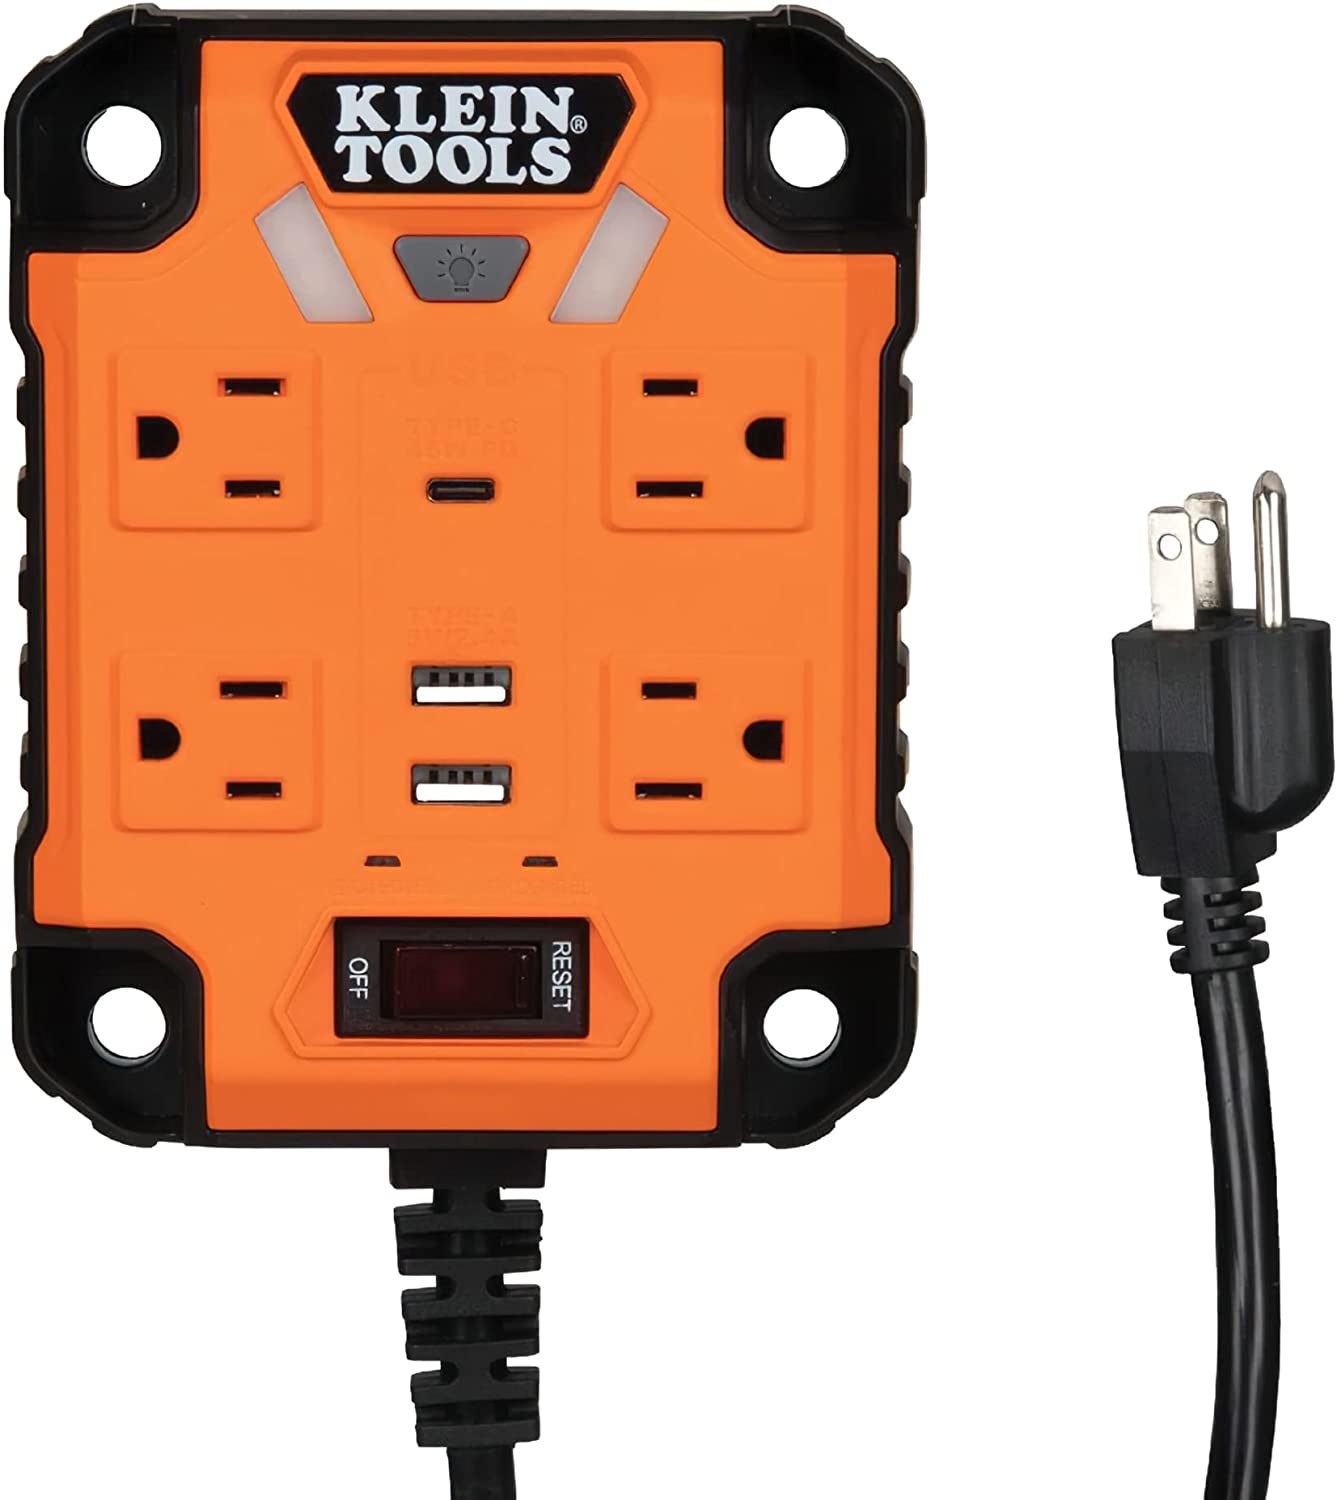 Primary image for The Klein Tools 29601 Magnetic Power Strip Features A Surge Protector, Four